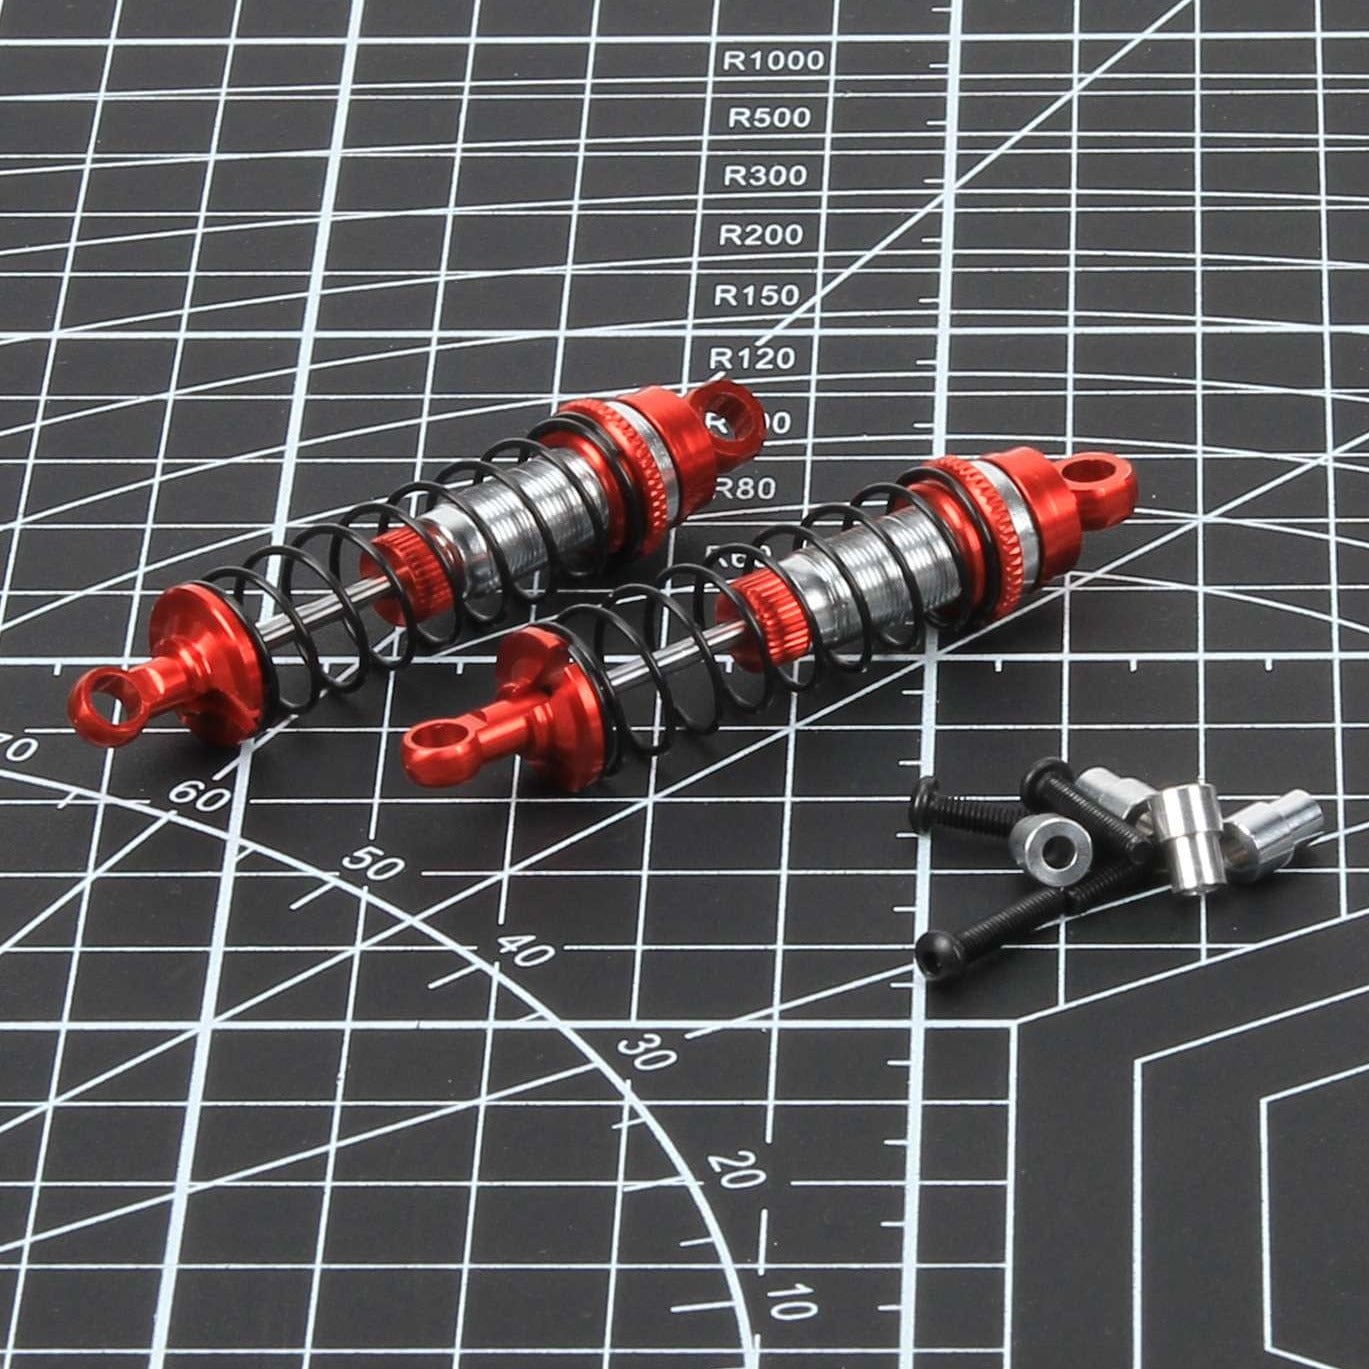 RCAWD Traxxas Latrax Red / A Set RCAWD Oil-filled Assembled with Springs Shocks 2pcs for 1/18 Traxxas Latrax Upgrades